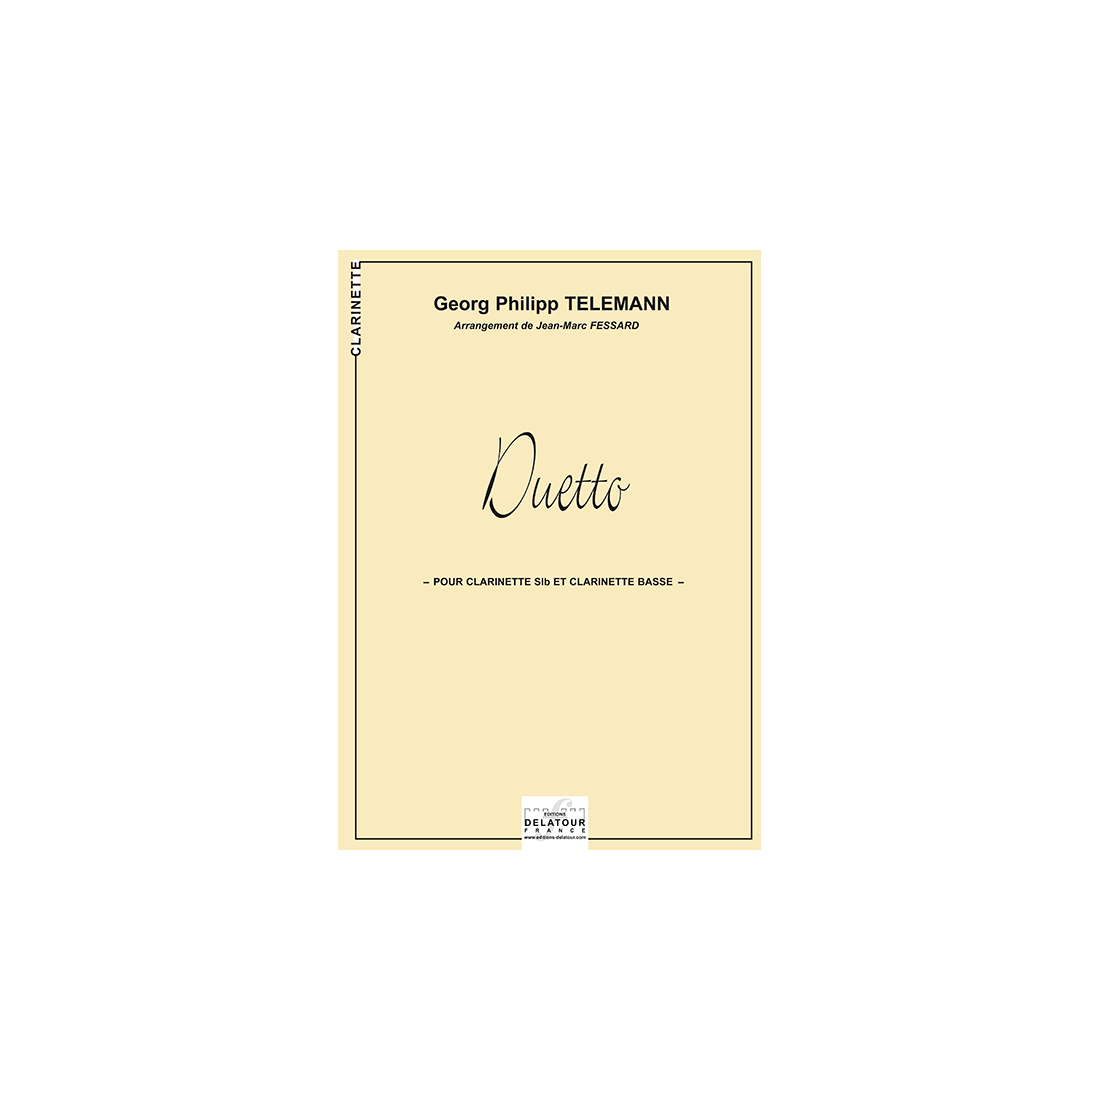 Duetto for clarinet and bass clarinet